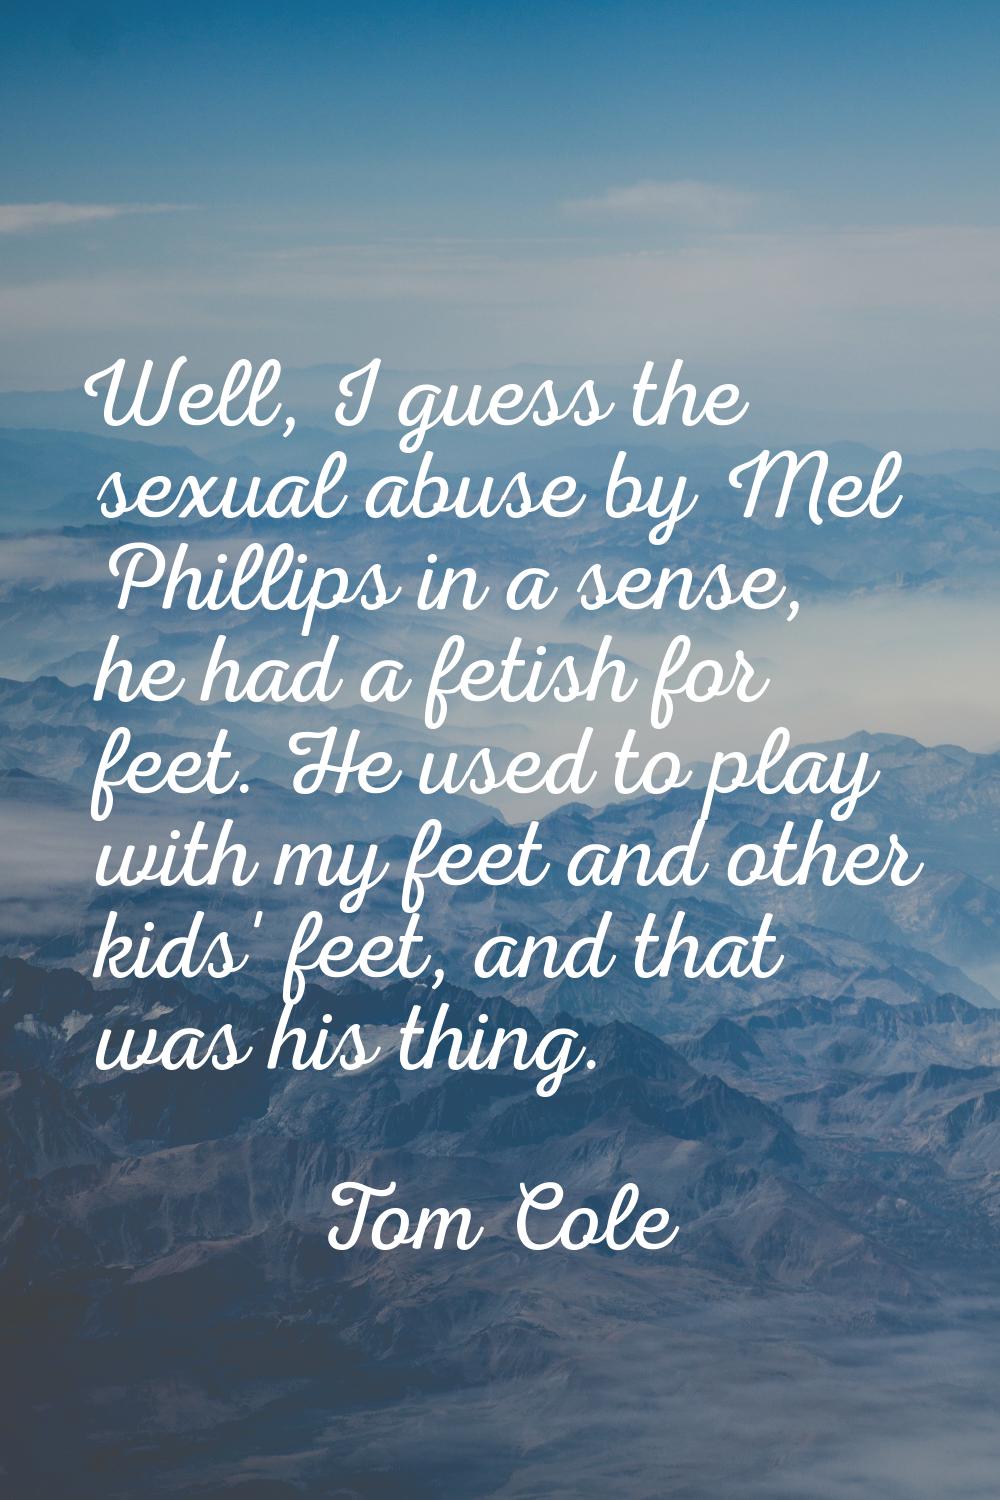 Well, I guess the sexual abuse by Mel Phillips in a sense, he had a fetish for feet. He used to pla